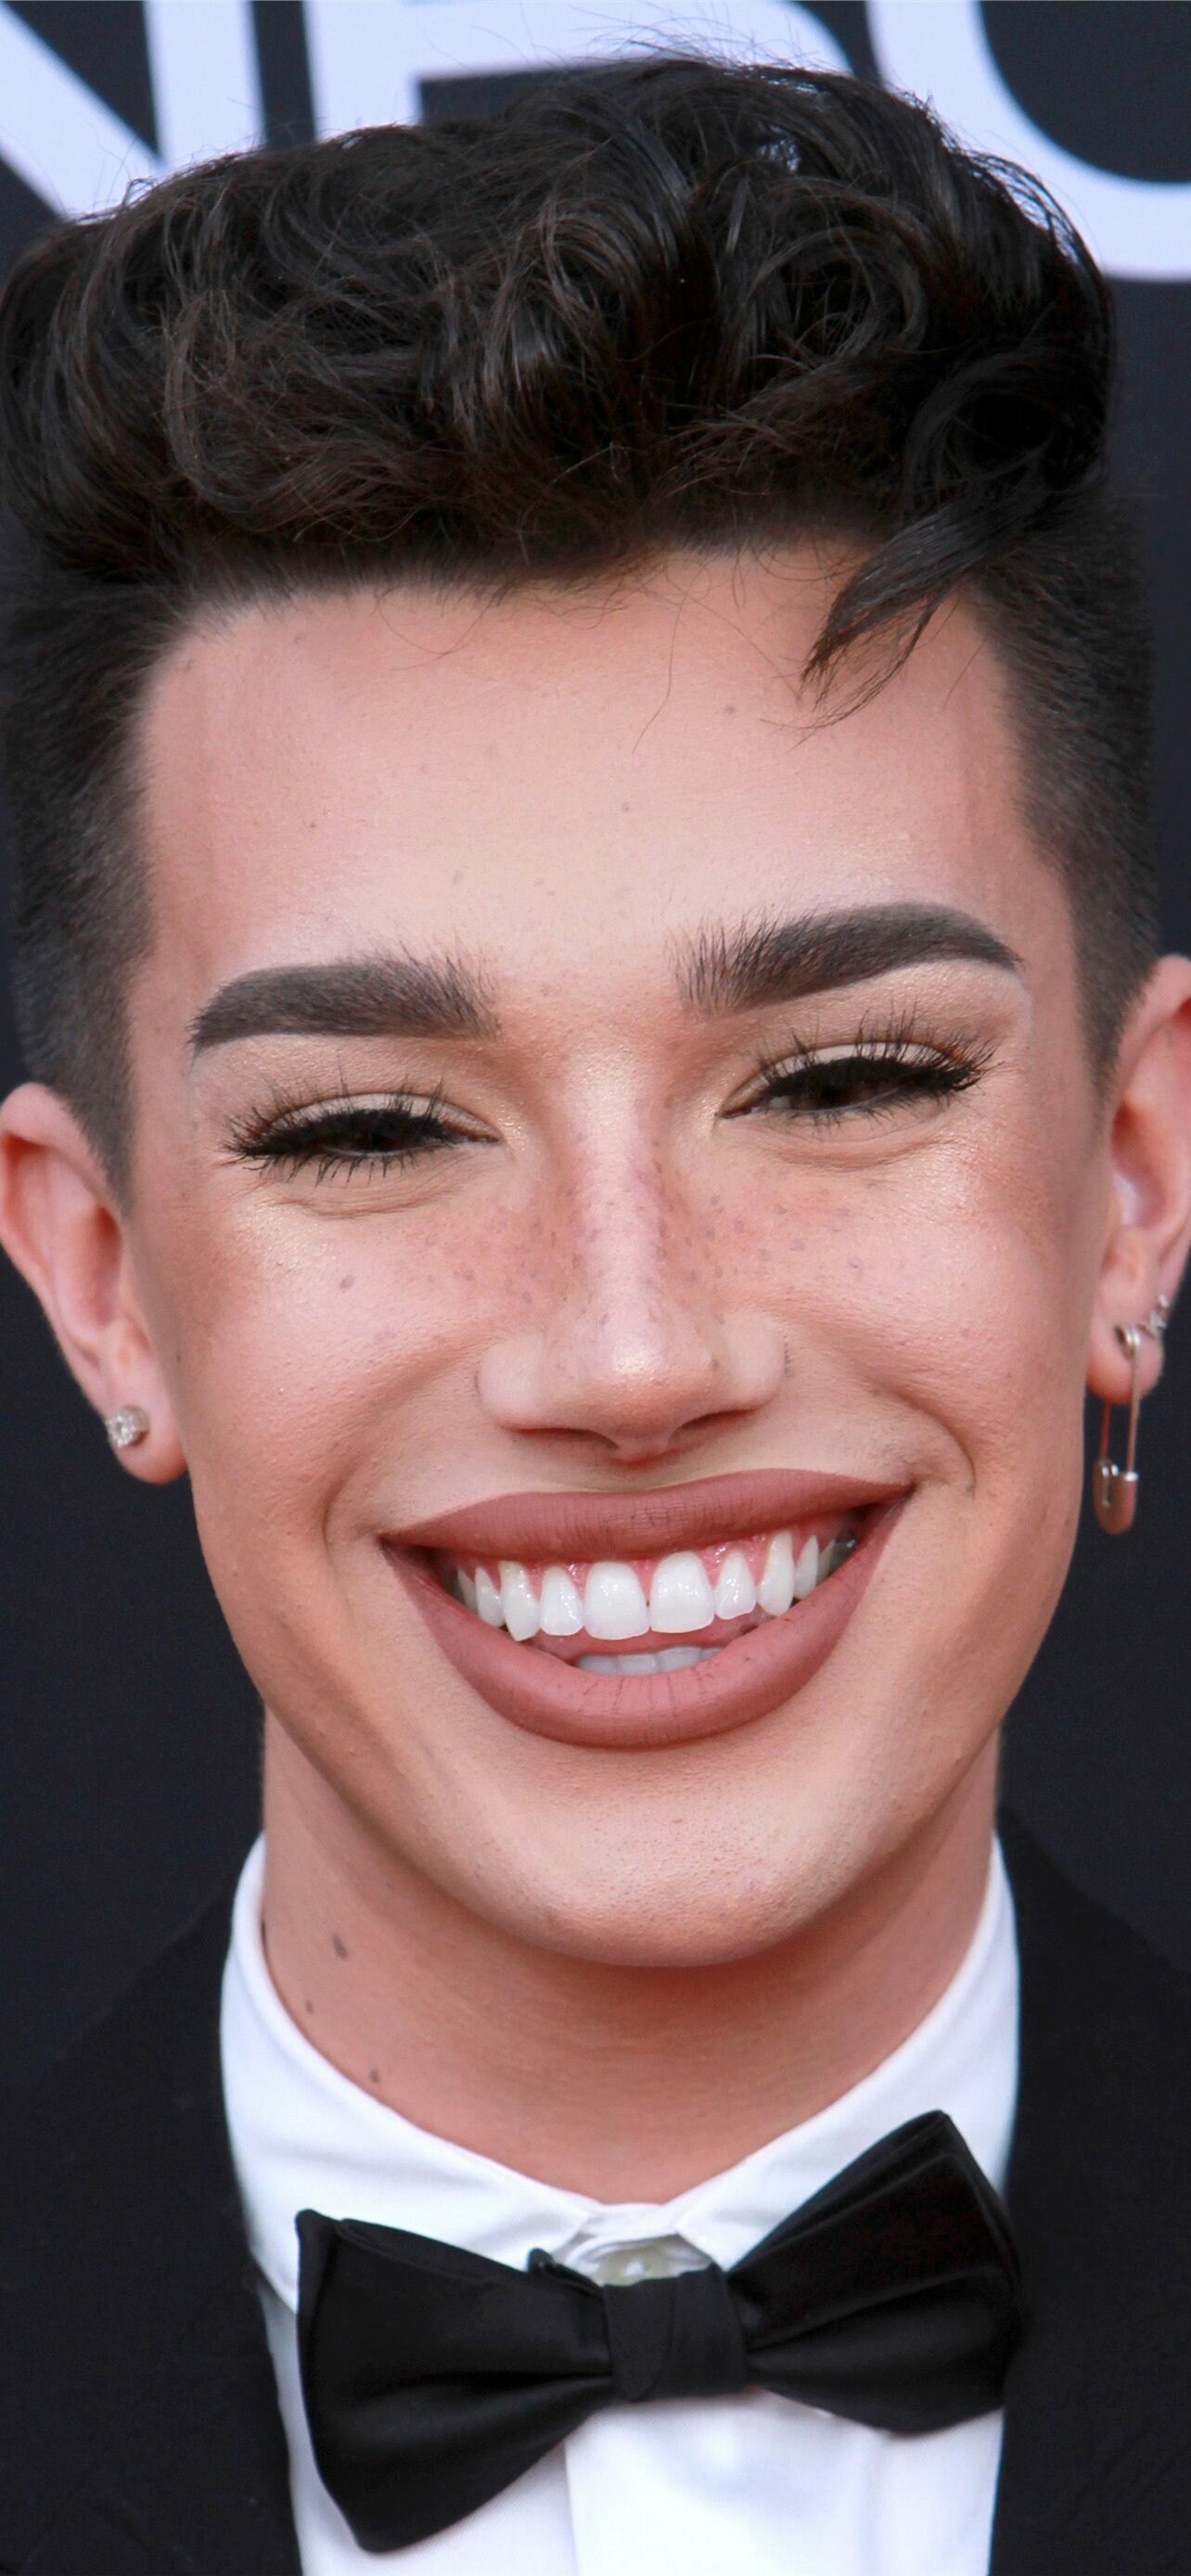 James Charles Wallpapers (23+ images inside)